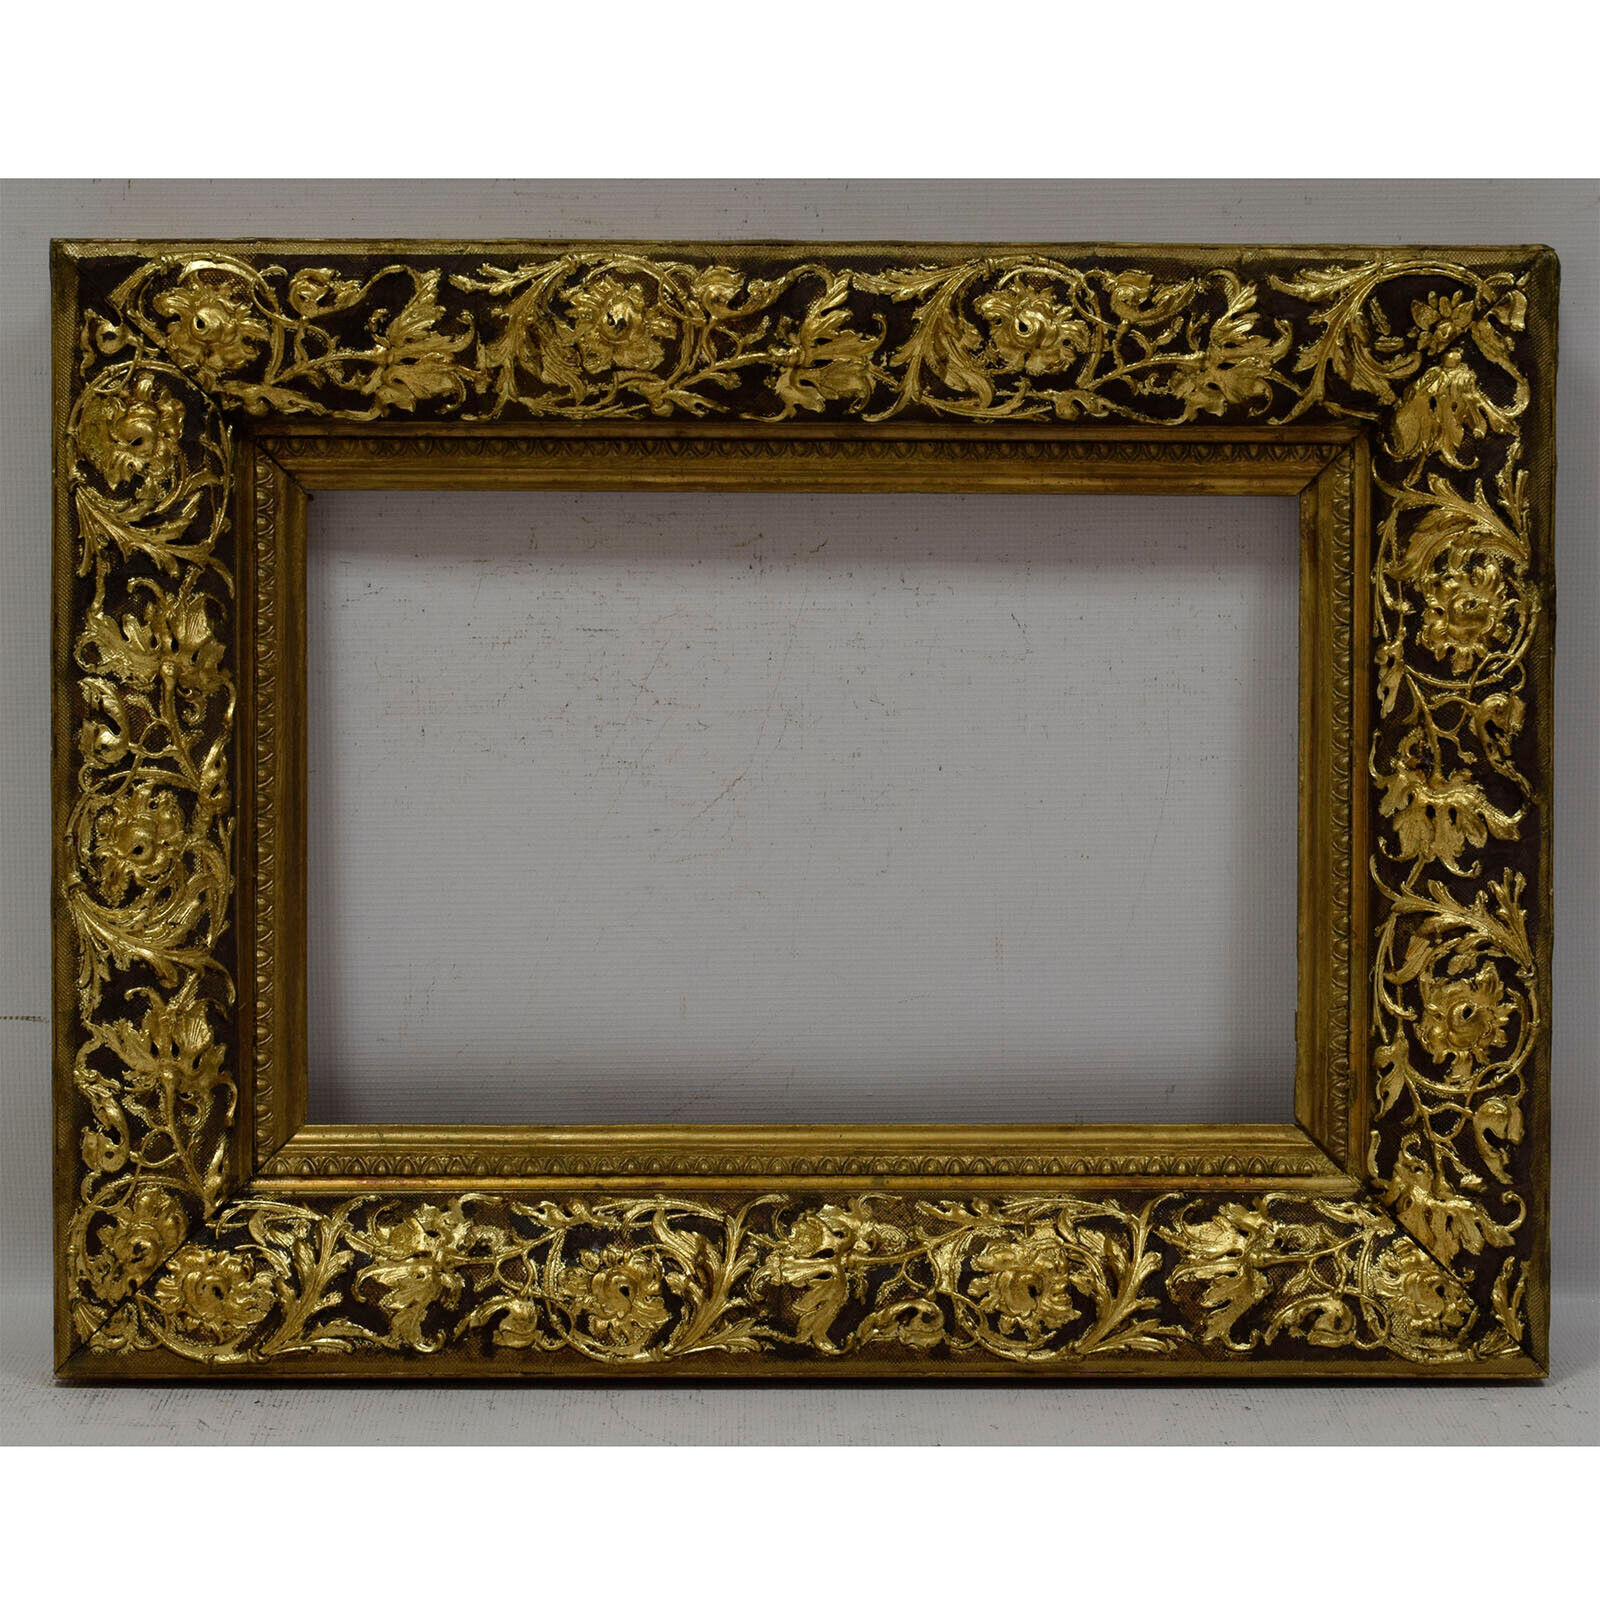 Ca.1900-1930 Old wooden frame decorative with metal leaf Internal: 19.4x12,5 in